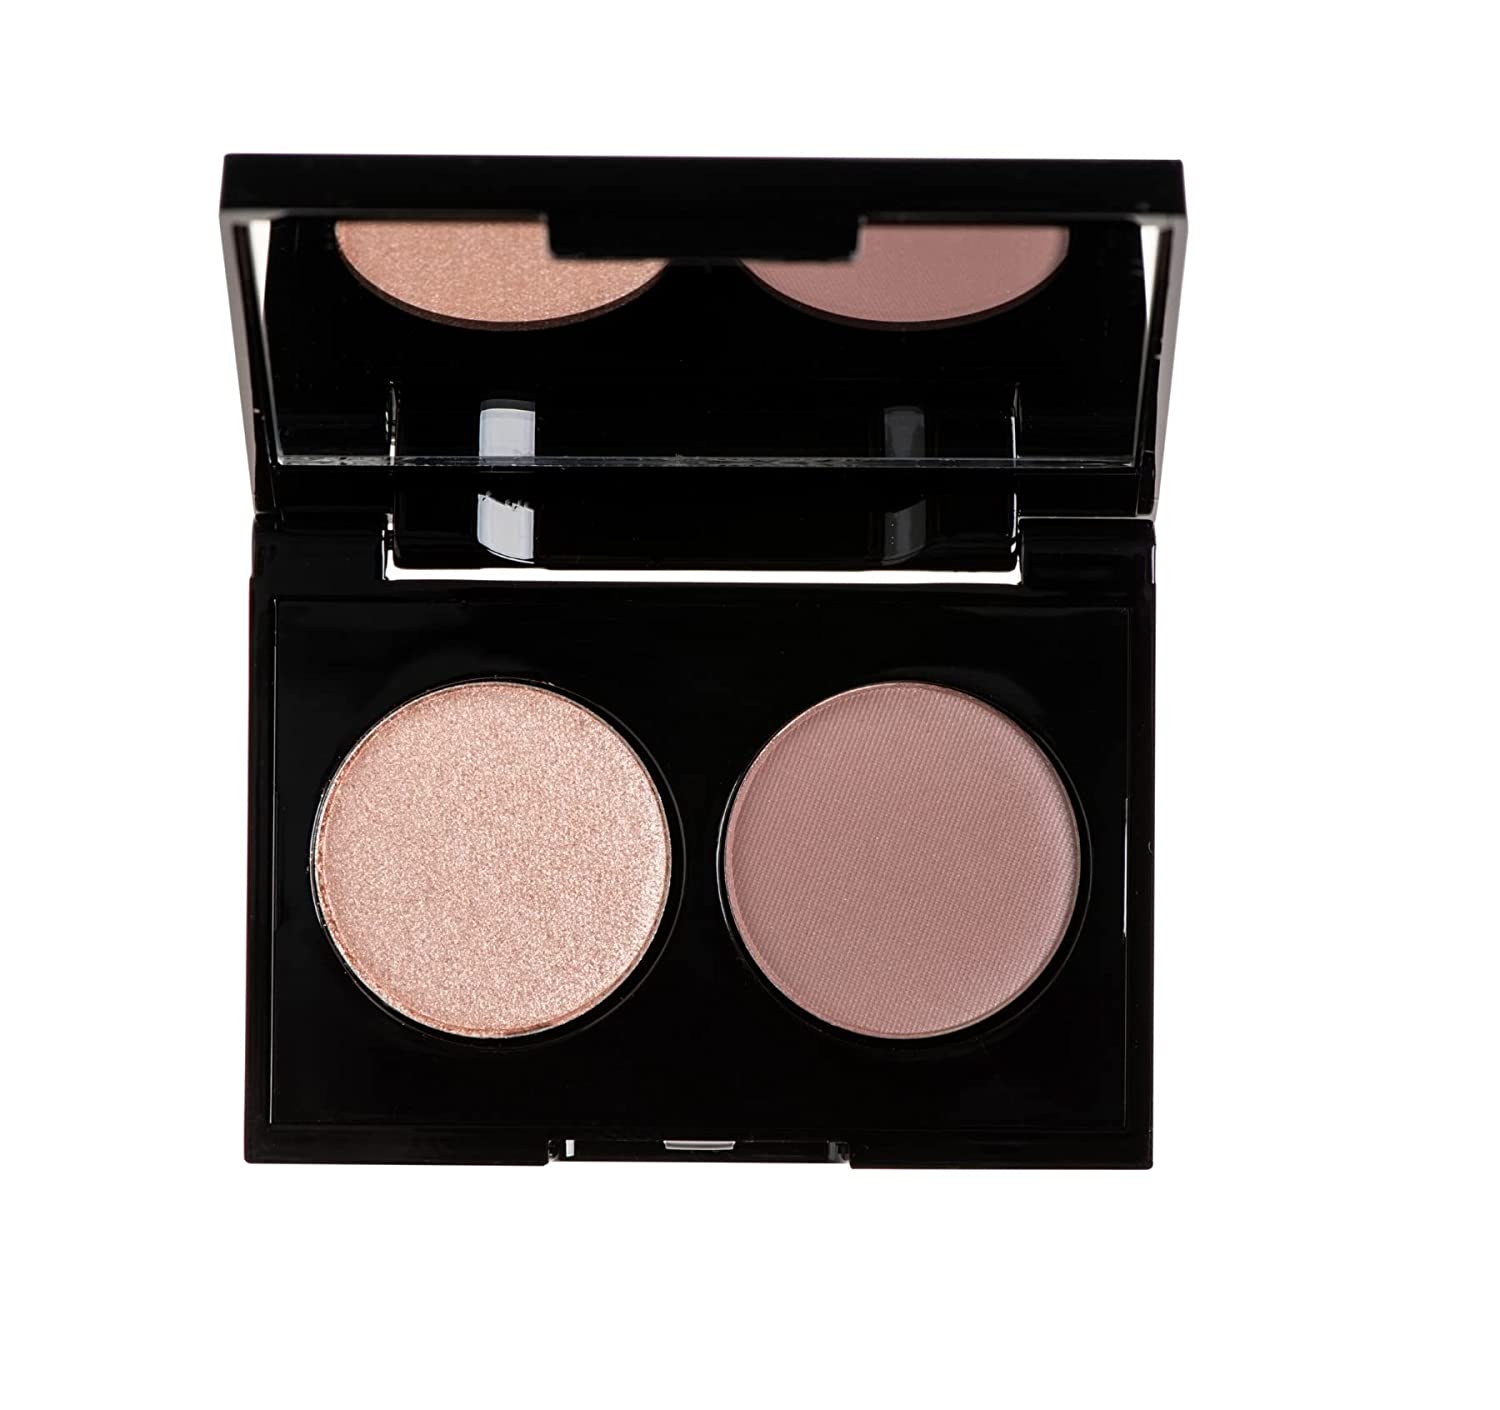 Corrres duo eyeshadow palette Volcanic Minerals Velvet - Pink Rose 18, Eyeshadow Palette for Intense Color Result, 3 g